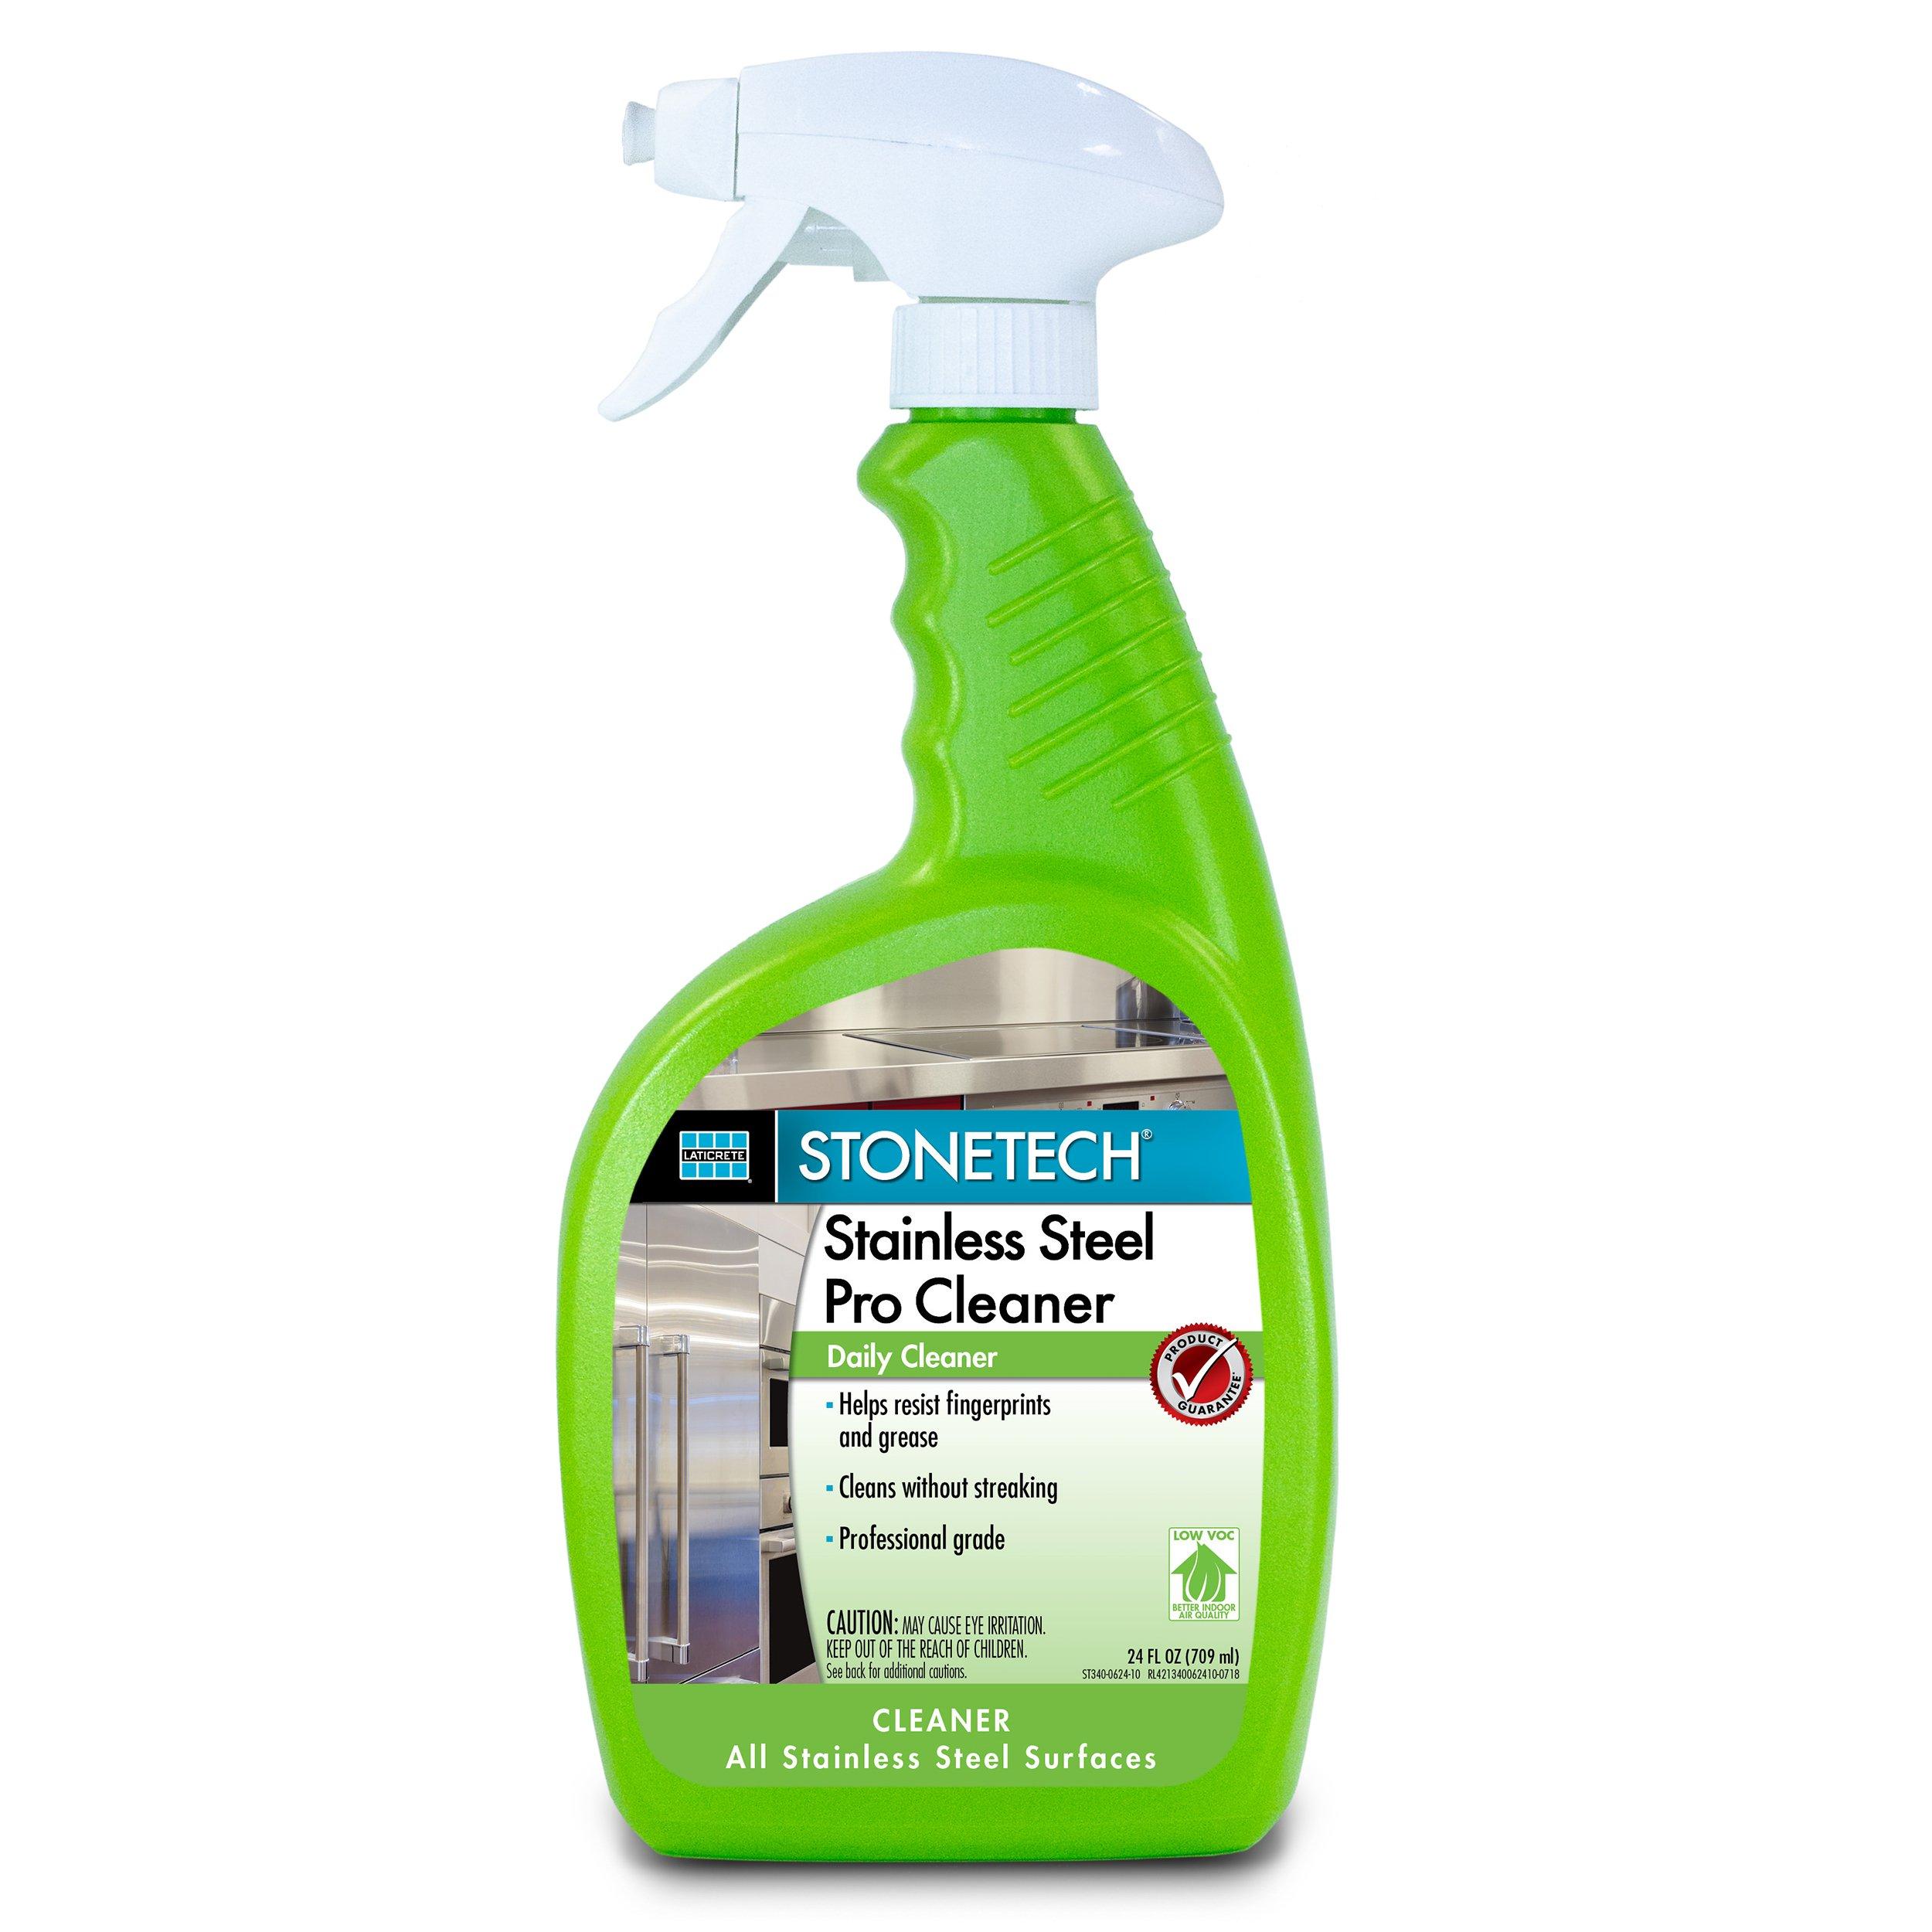 Laticrete Stonetech Stainless Steel Pro Cleaner